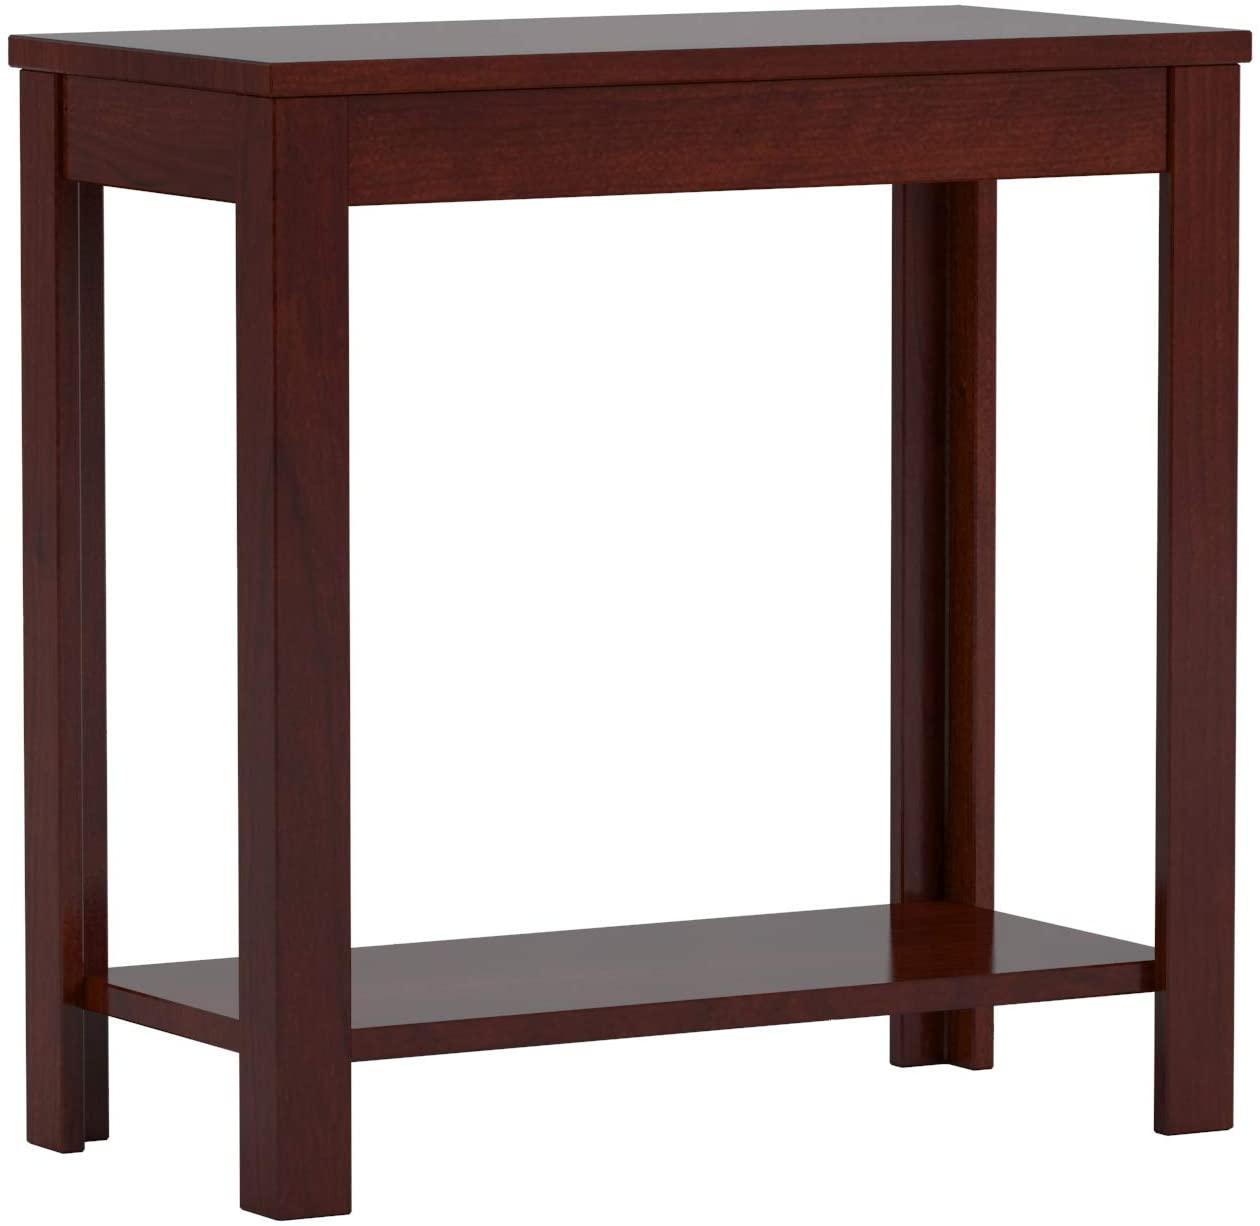 Rustic, Simple 2 End Tables Pierce 7710-2pcs in Cherry 